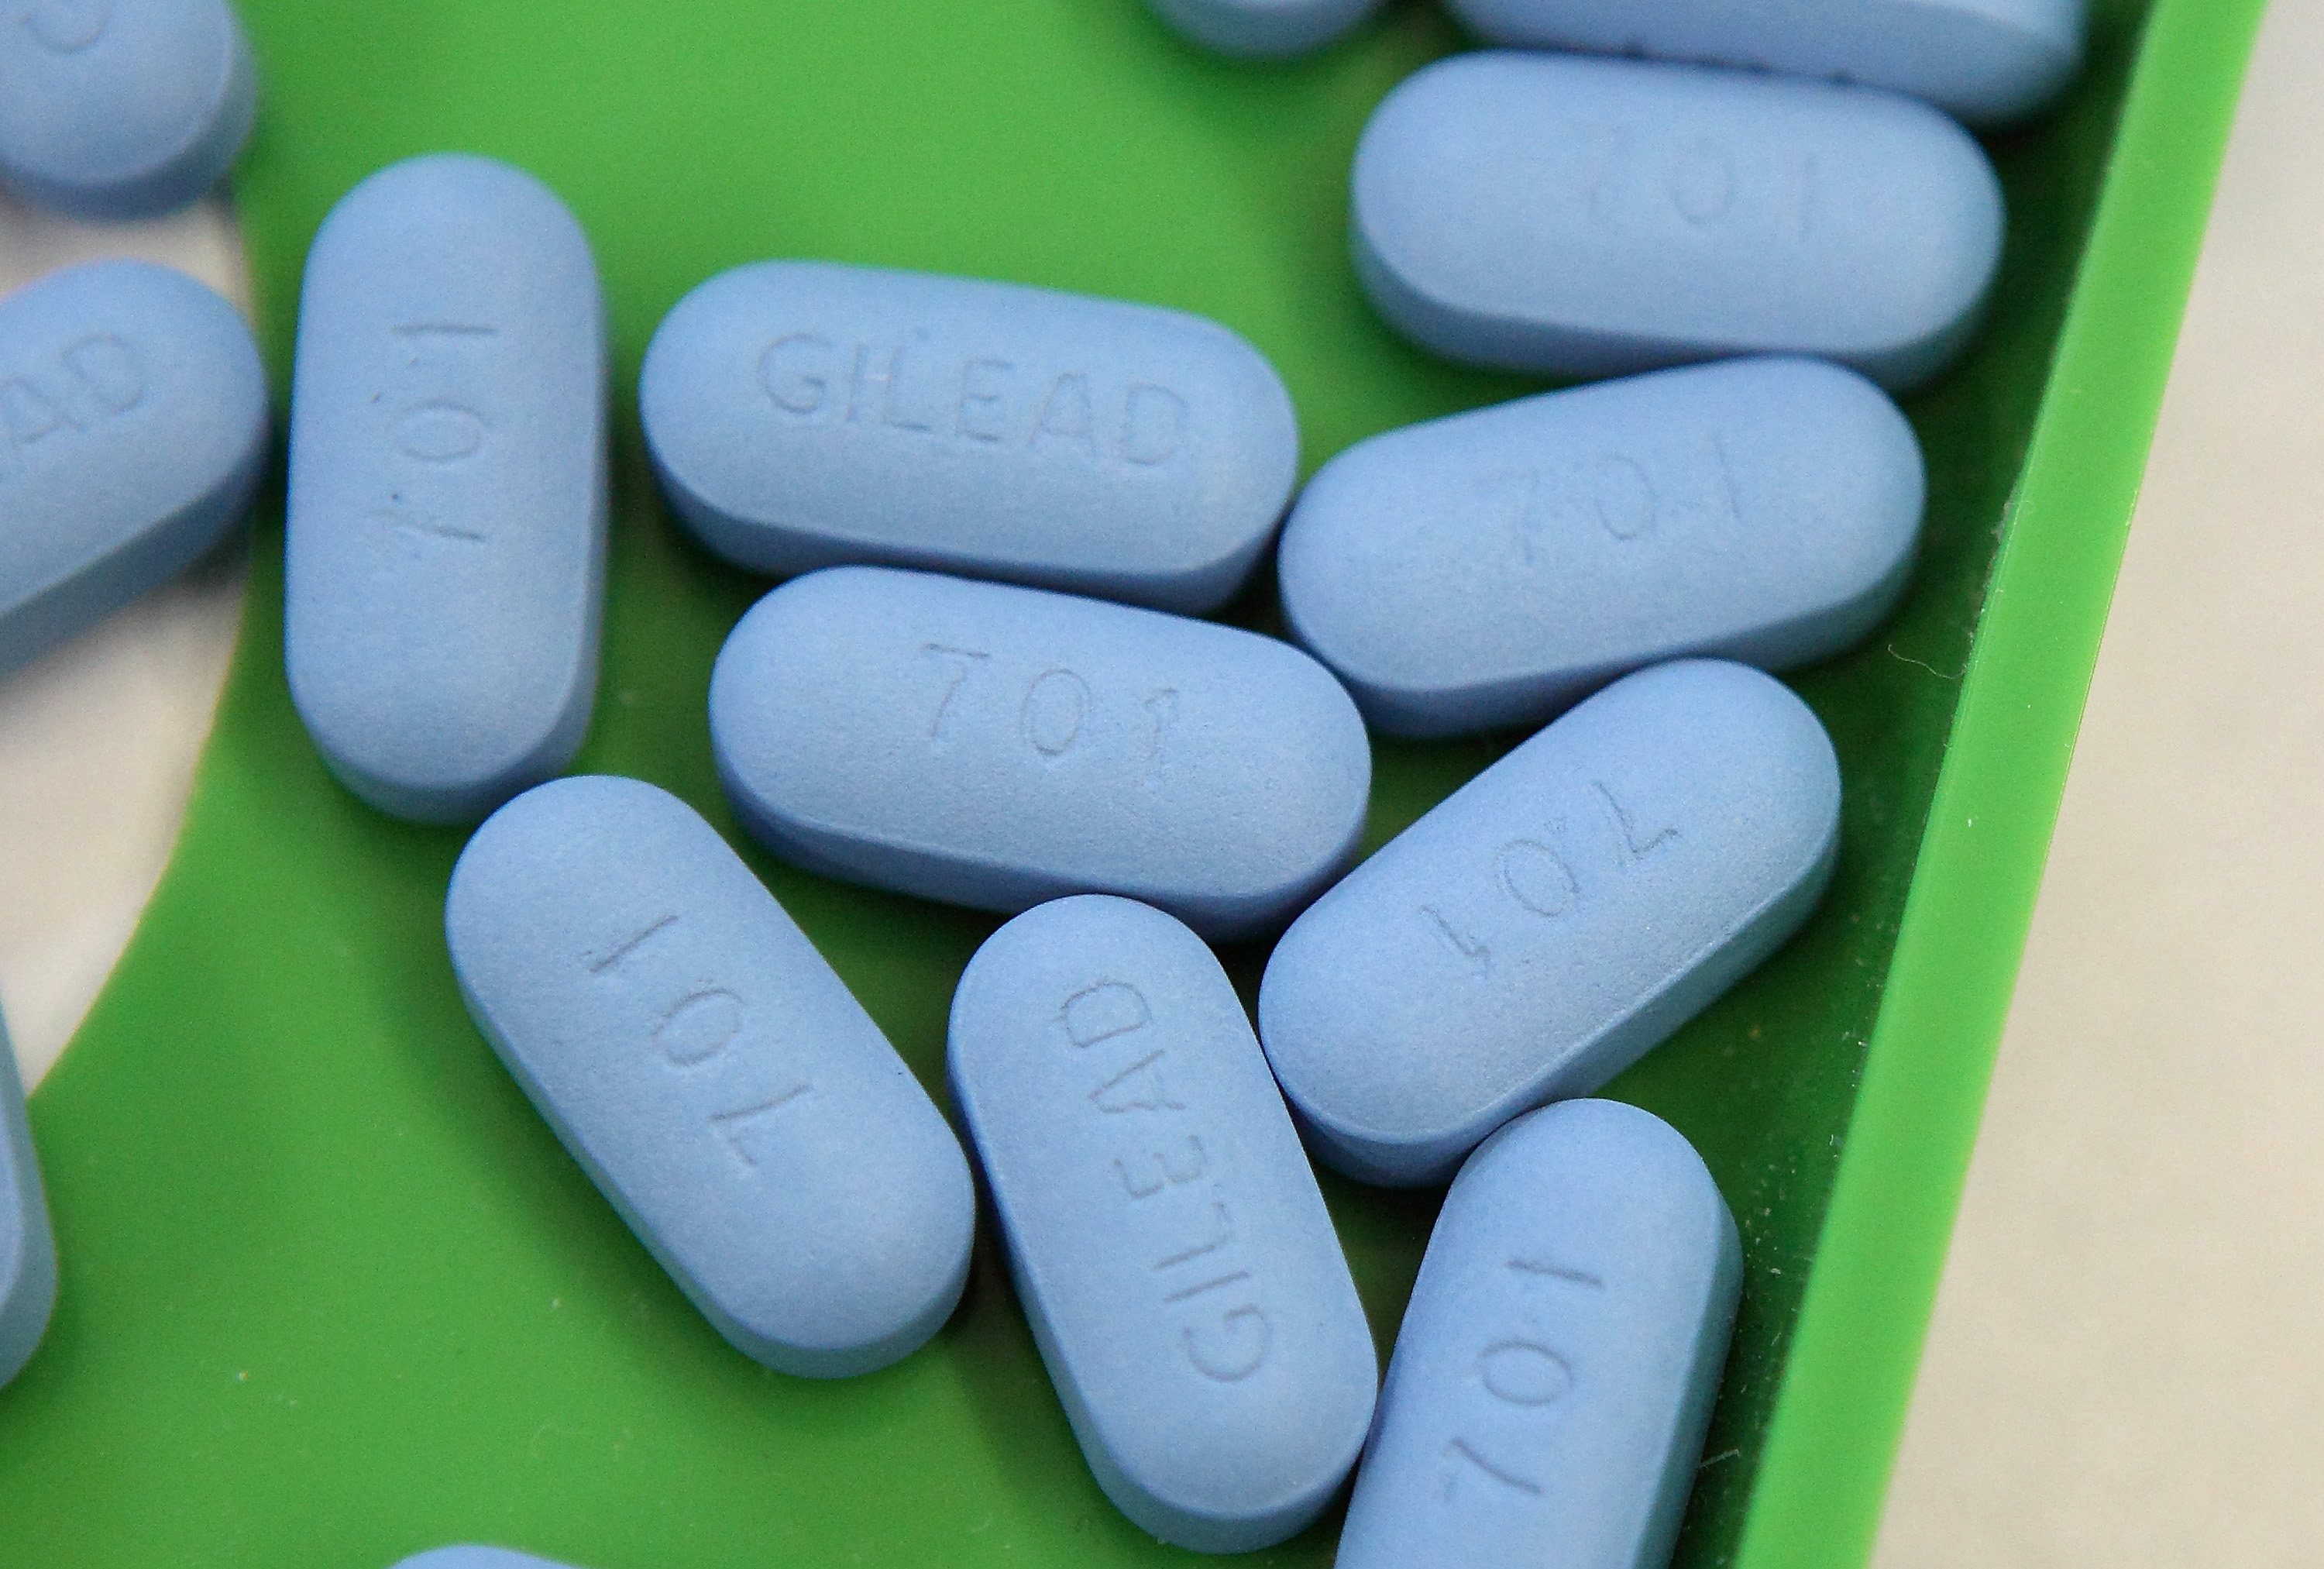 hiv-prevention-drug-to-be-considered-by-fda-kqed